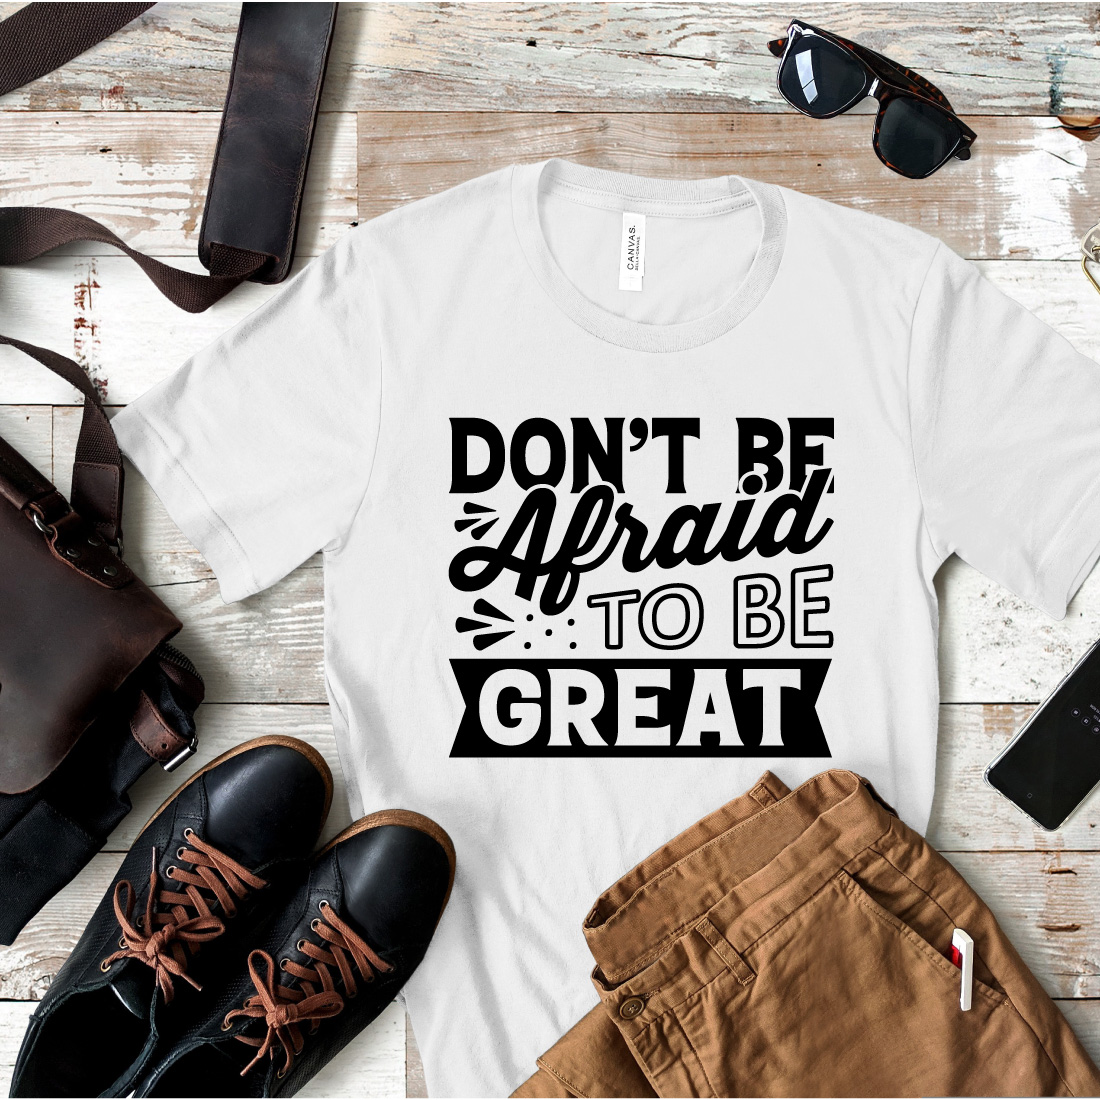 Motivational Typography T-shirt Design cover image.